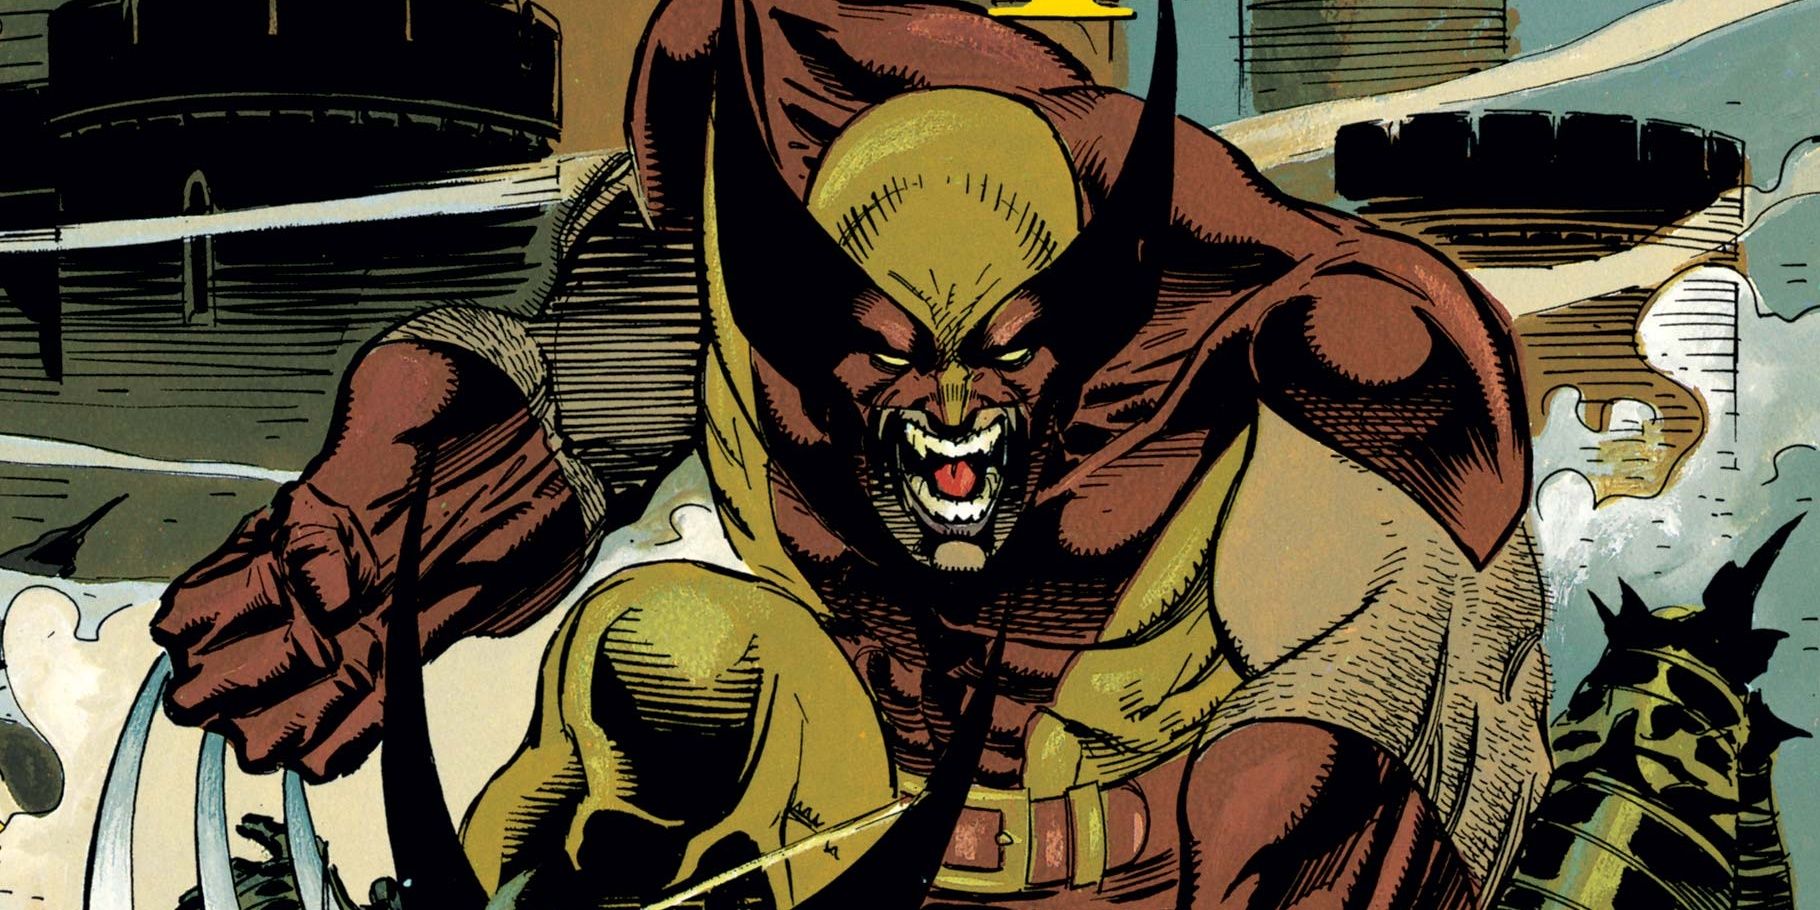 Wolverine snarls while wearing his yellow and brown costume